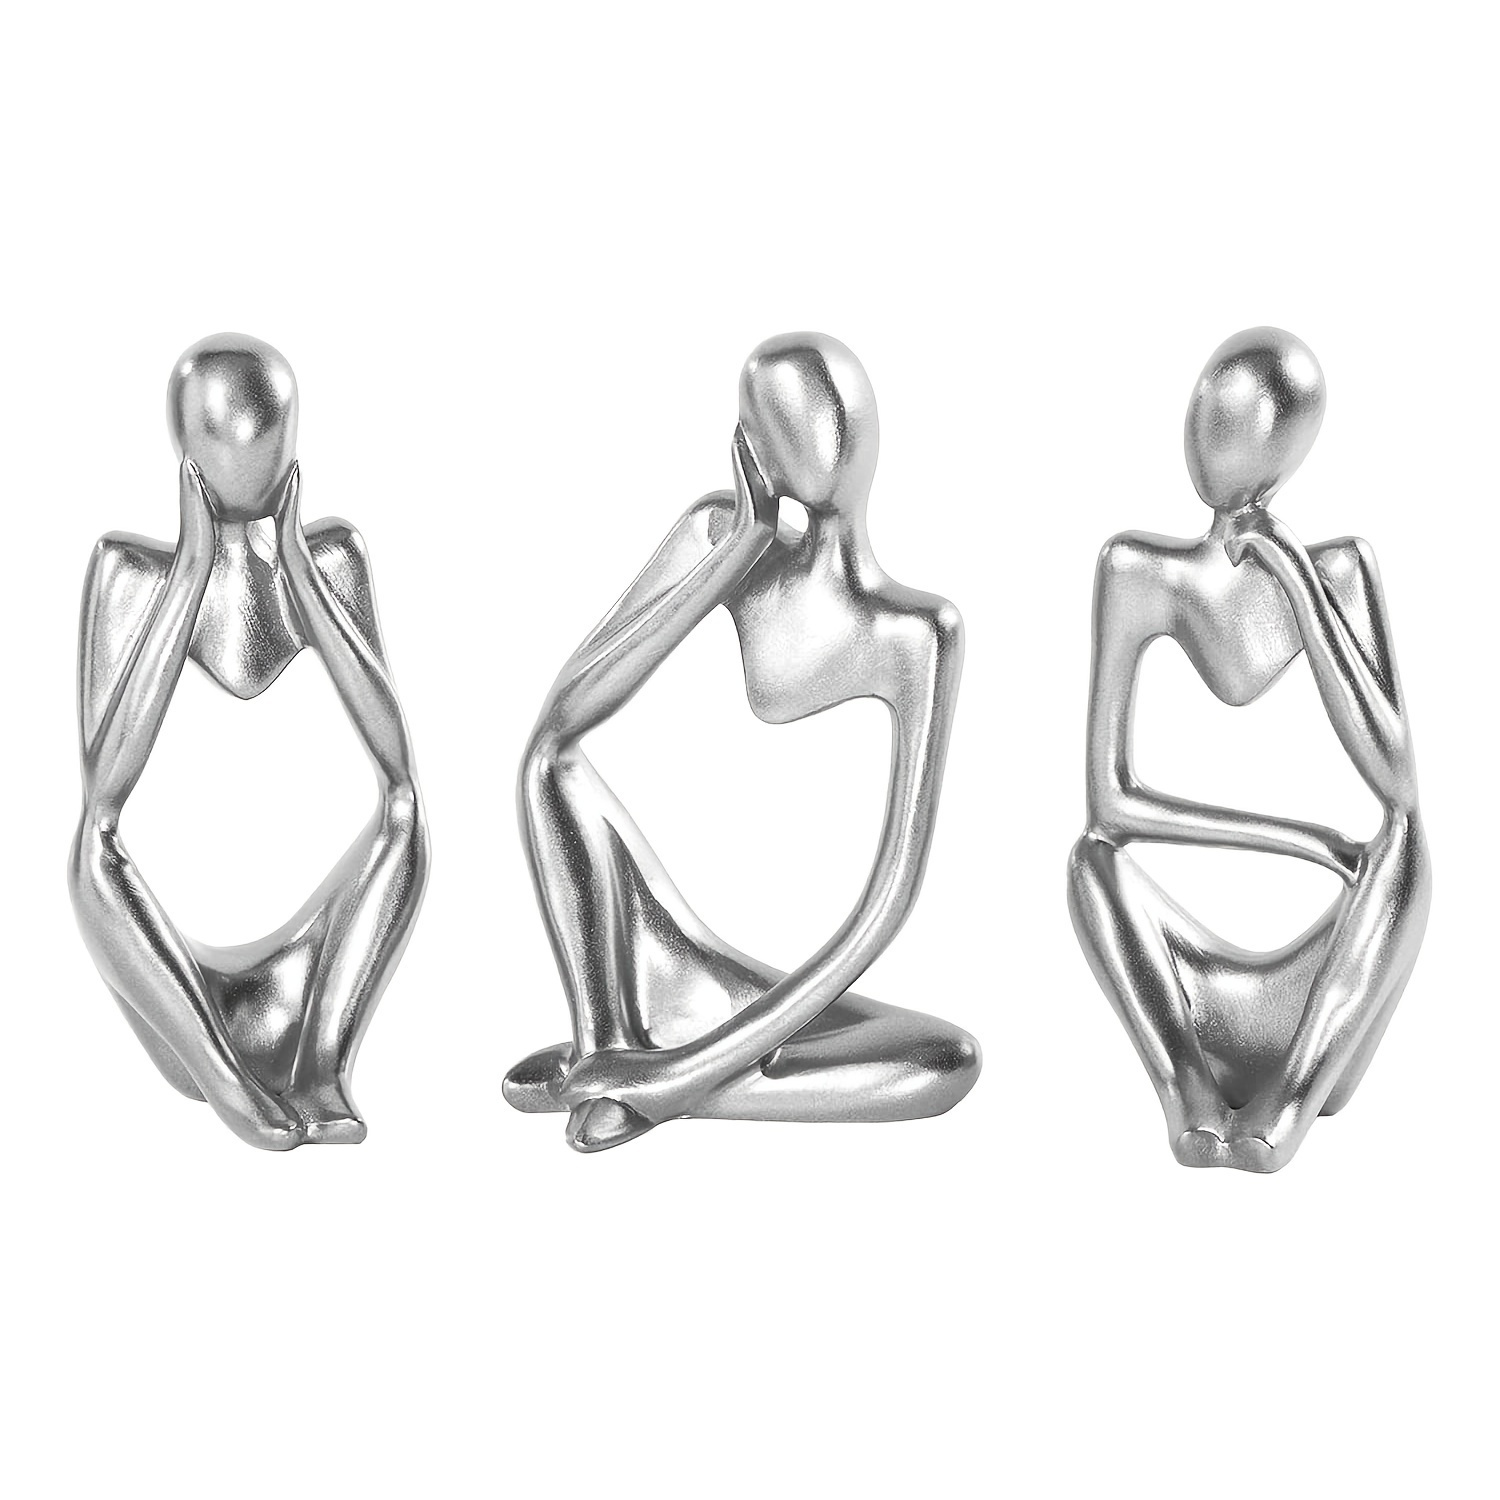 

1set, Thinker Statue Silvery Decor Abstract Art Sculpture, Silvery Resin Collectible Figurines For Home Living Room Office Shelf Decoration, Great Gift Ideas